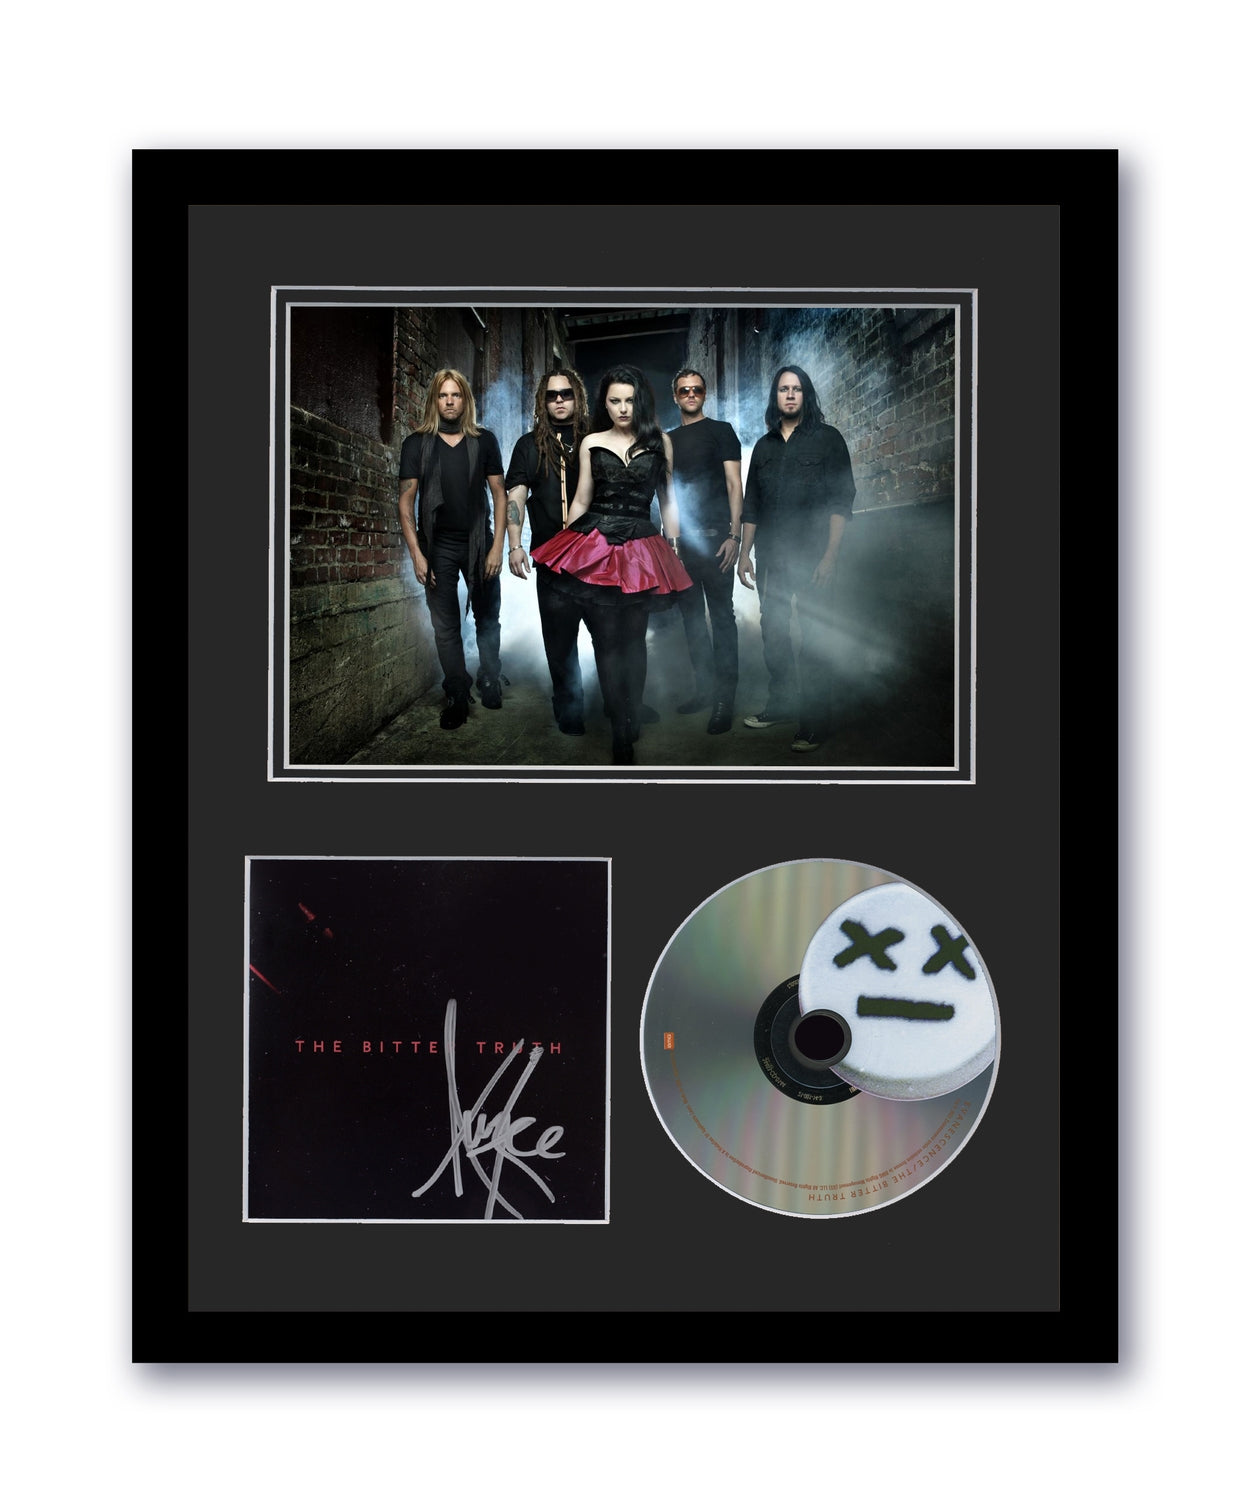 Evanescence Amy Lee Autographed 11x14 Custom Framed CD Photo Bitter Truth Signed ACOA 4